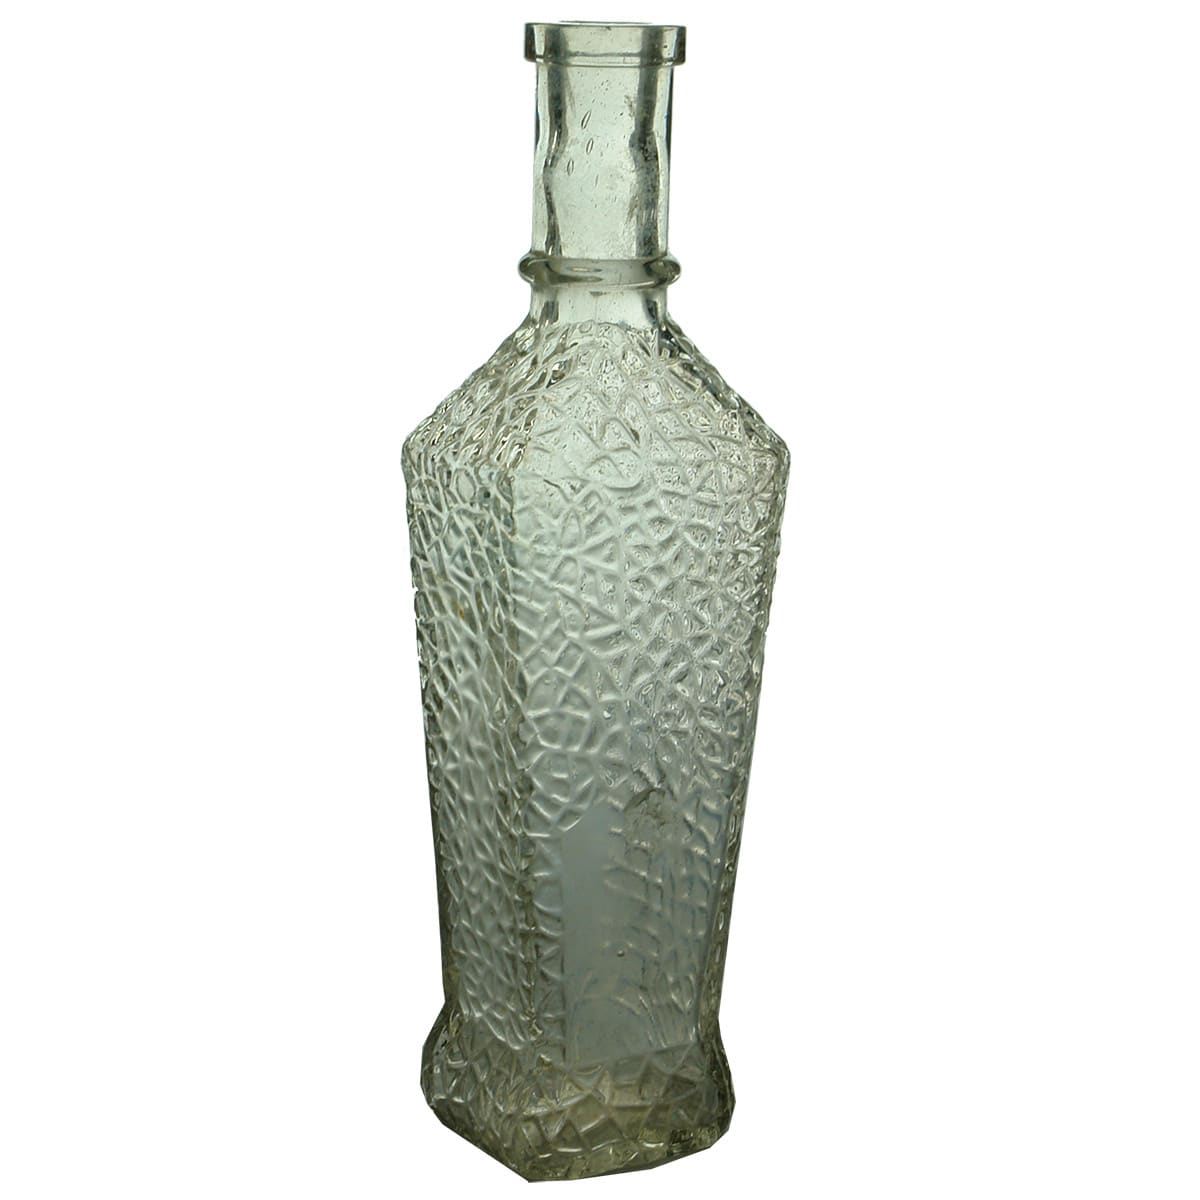 Condiment/Sauce or Perfume? Clear. Fancy crocodile skin like pattern with label spaces.